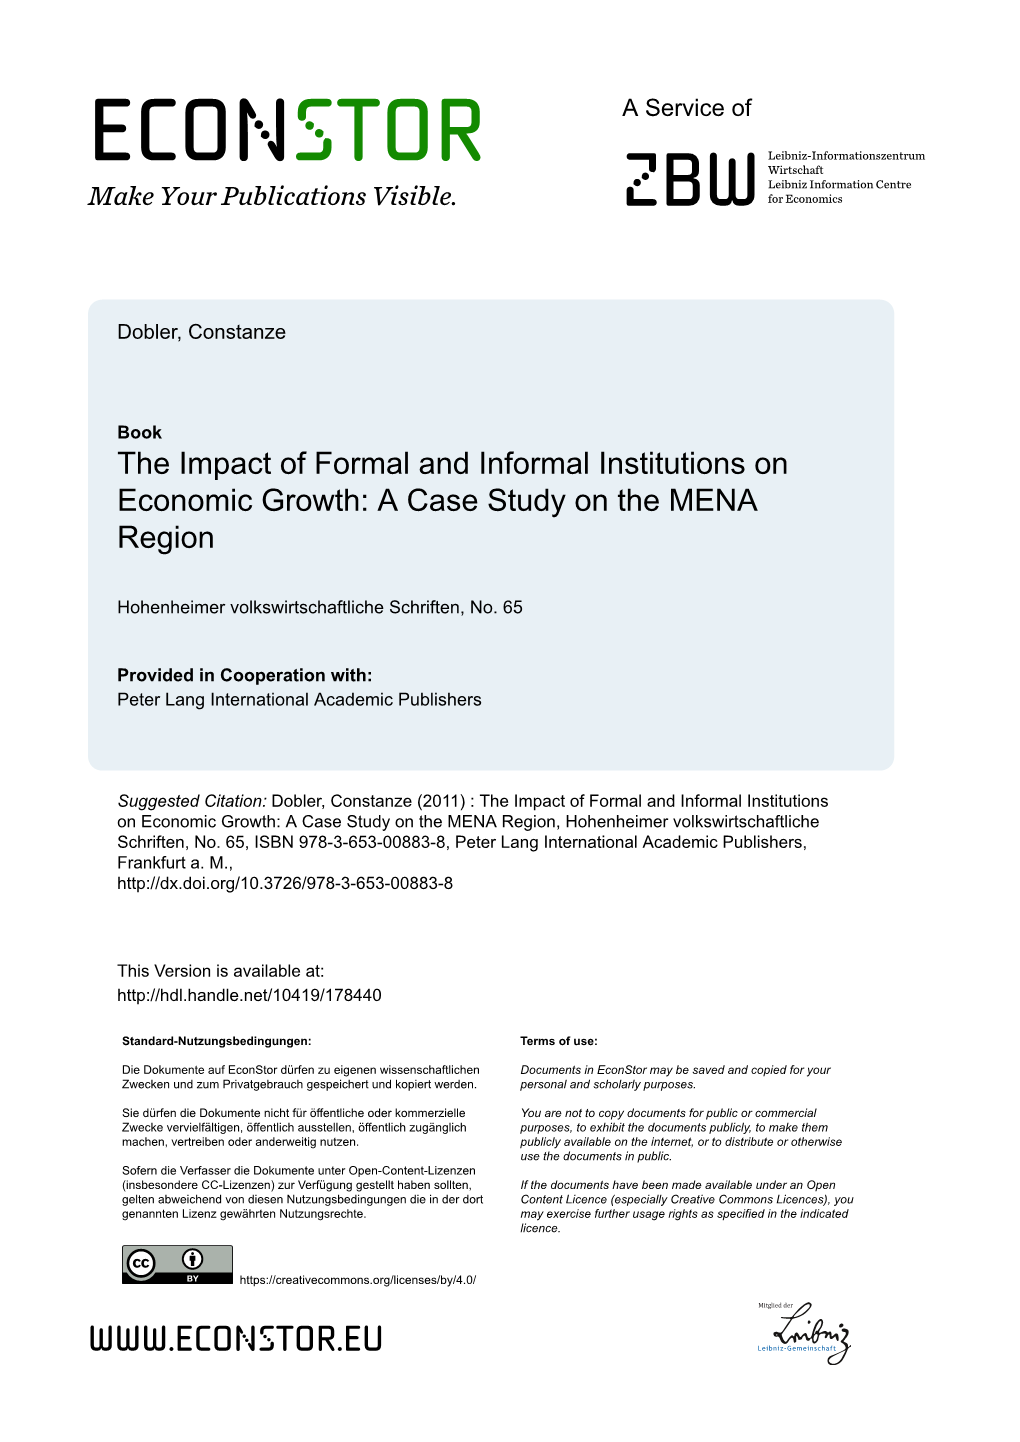 The Impact of Formal and Informal Institutions on Economic Growth: a Case Study on the MENA Region